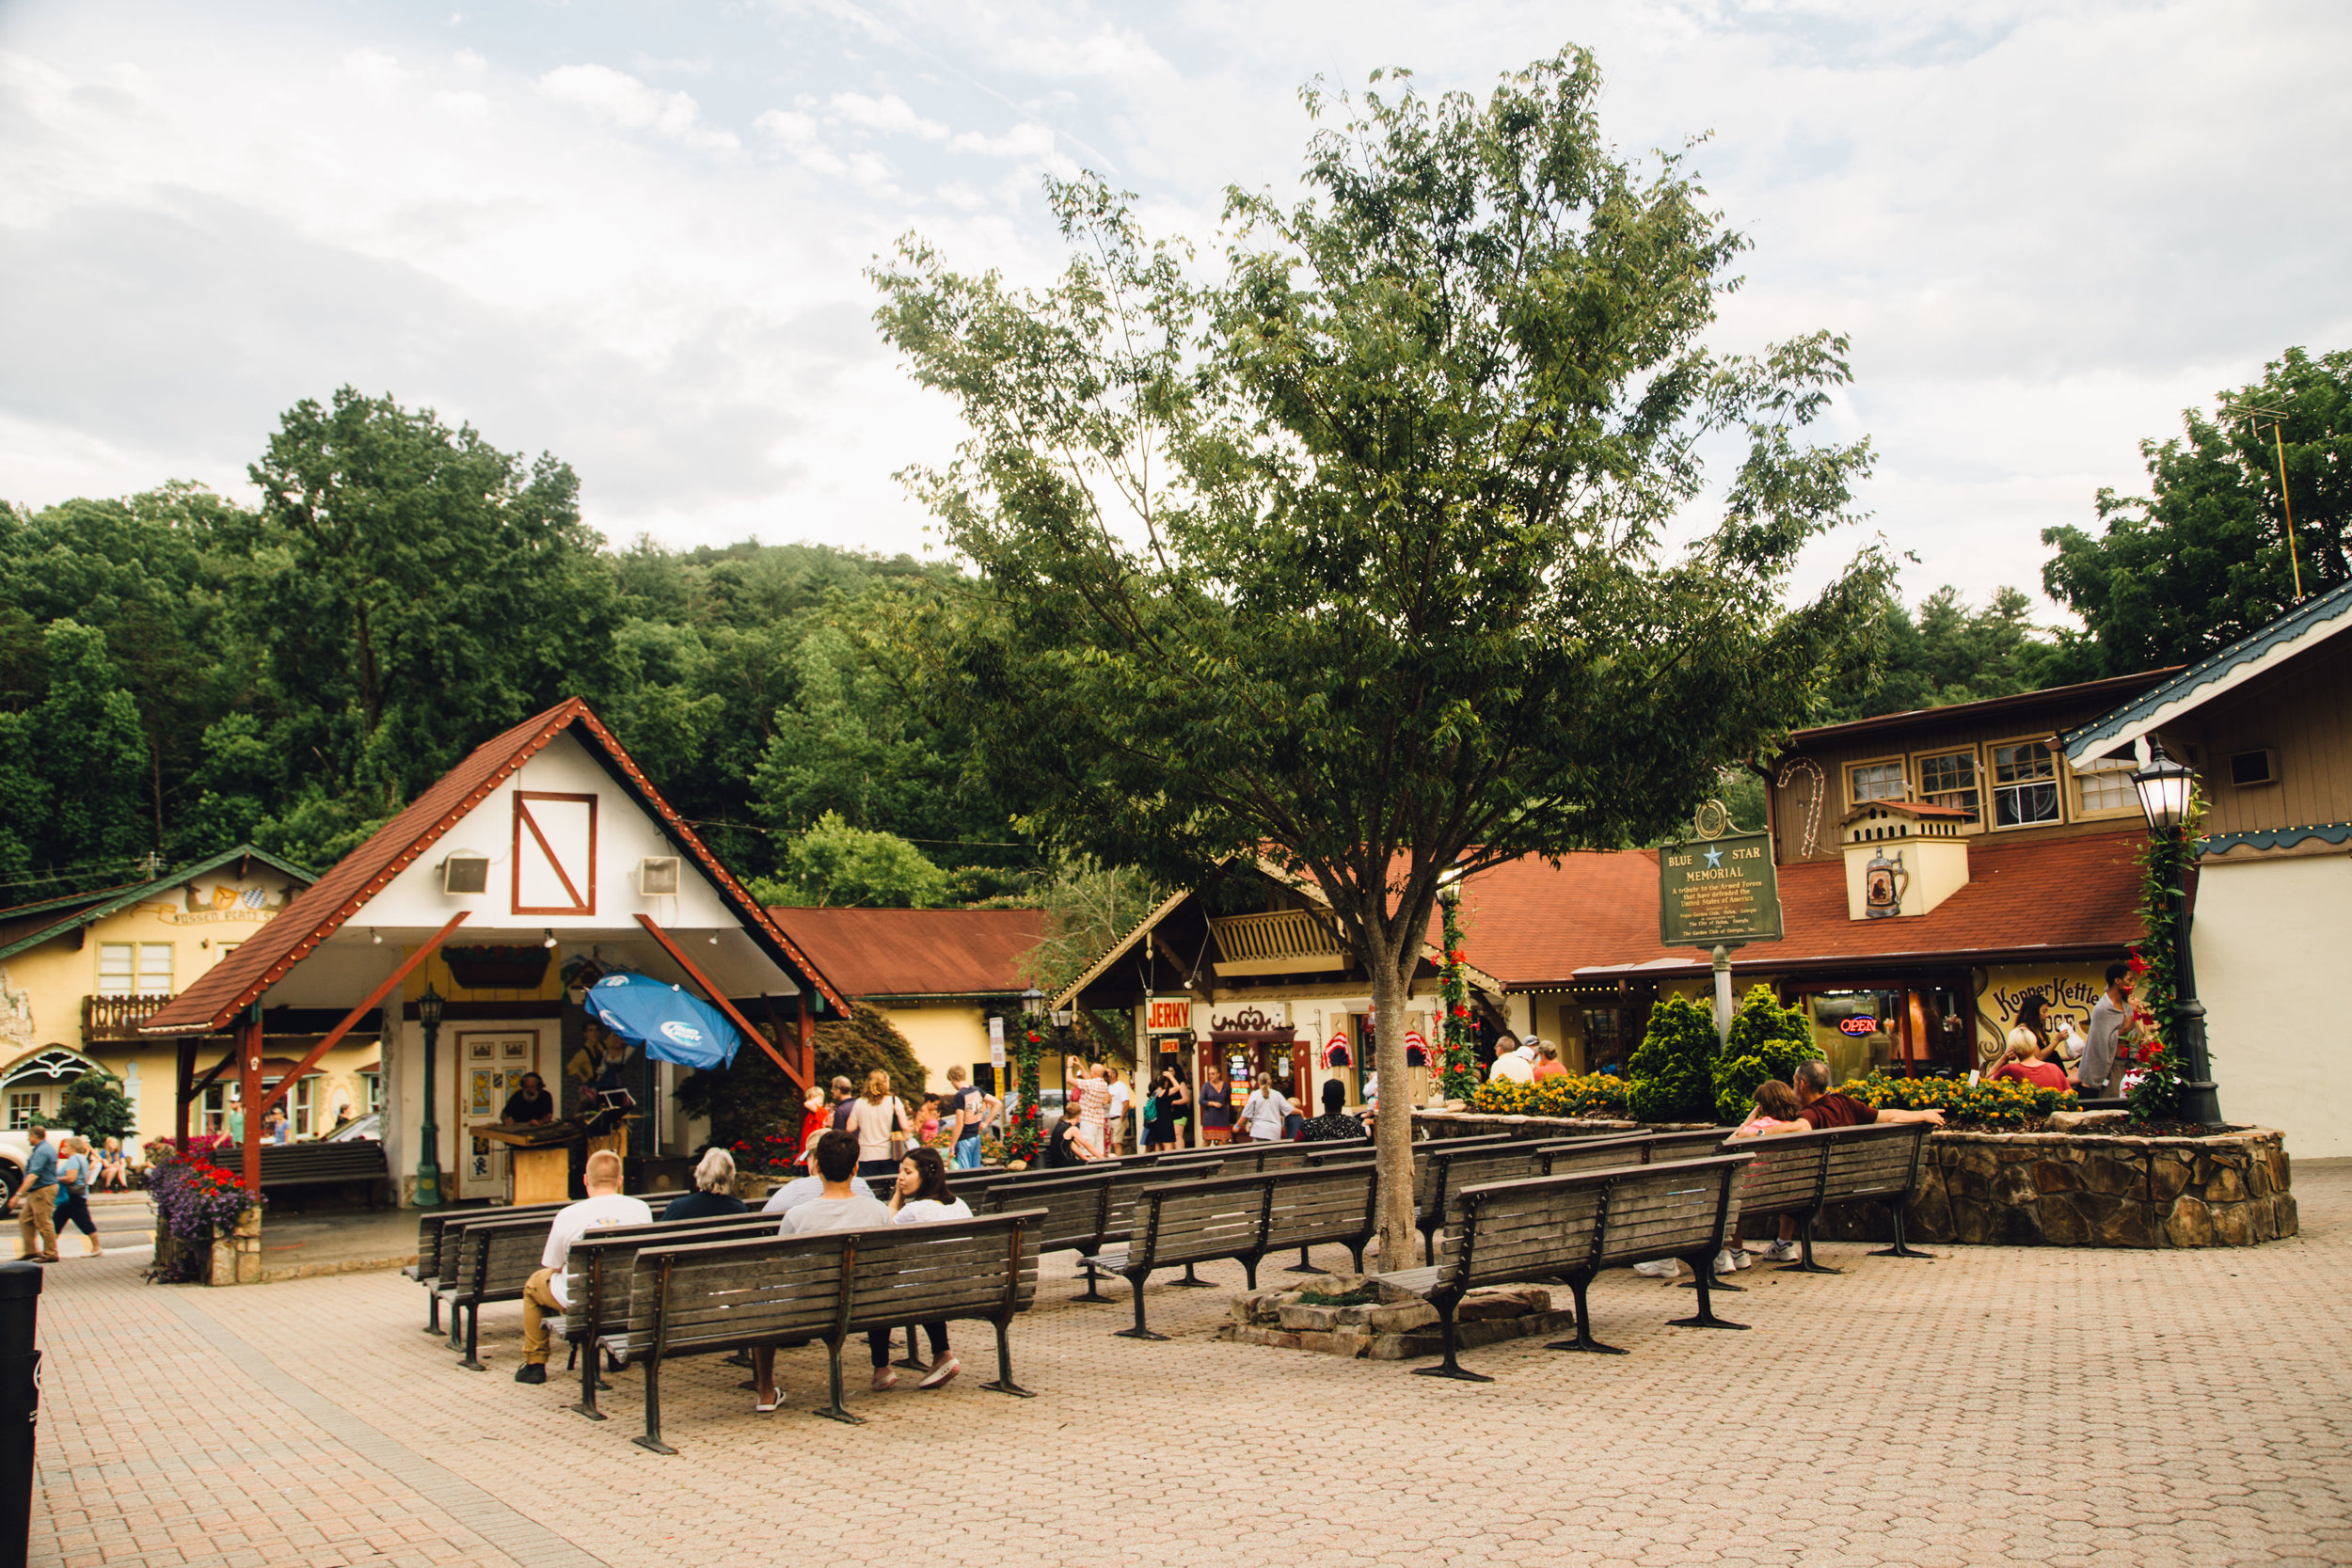 Alpine Helen is a town like no other. Learn about what's in store there for a perfect Georgia summer day!